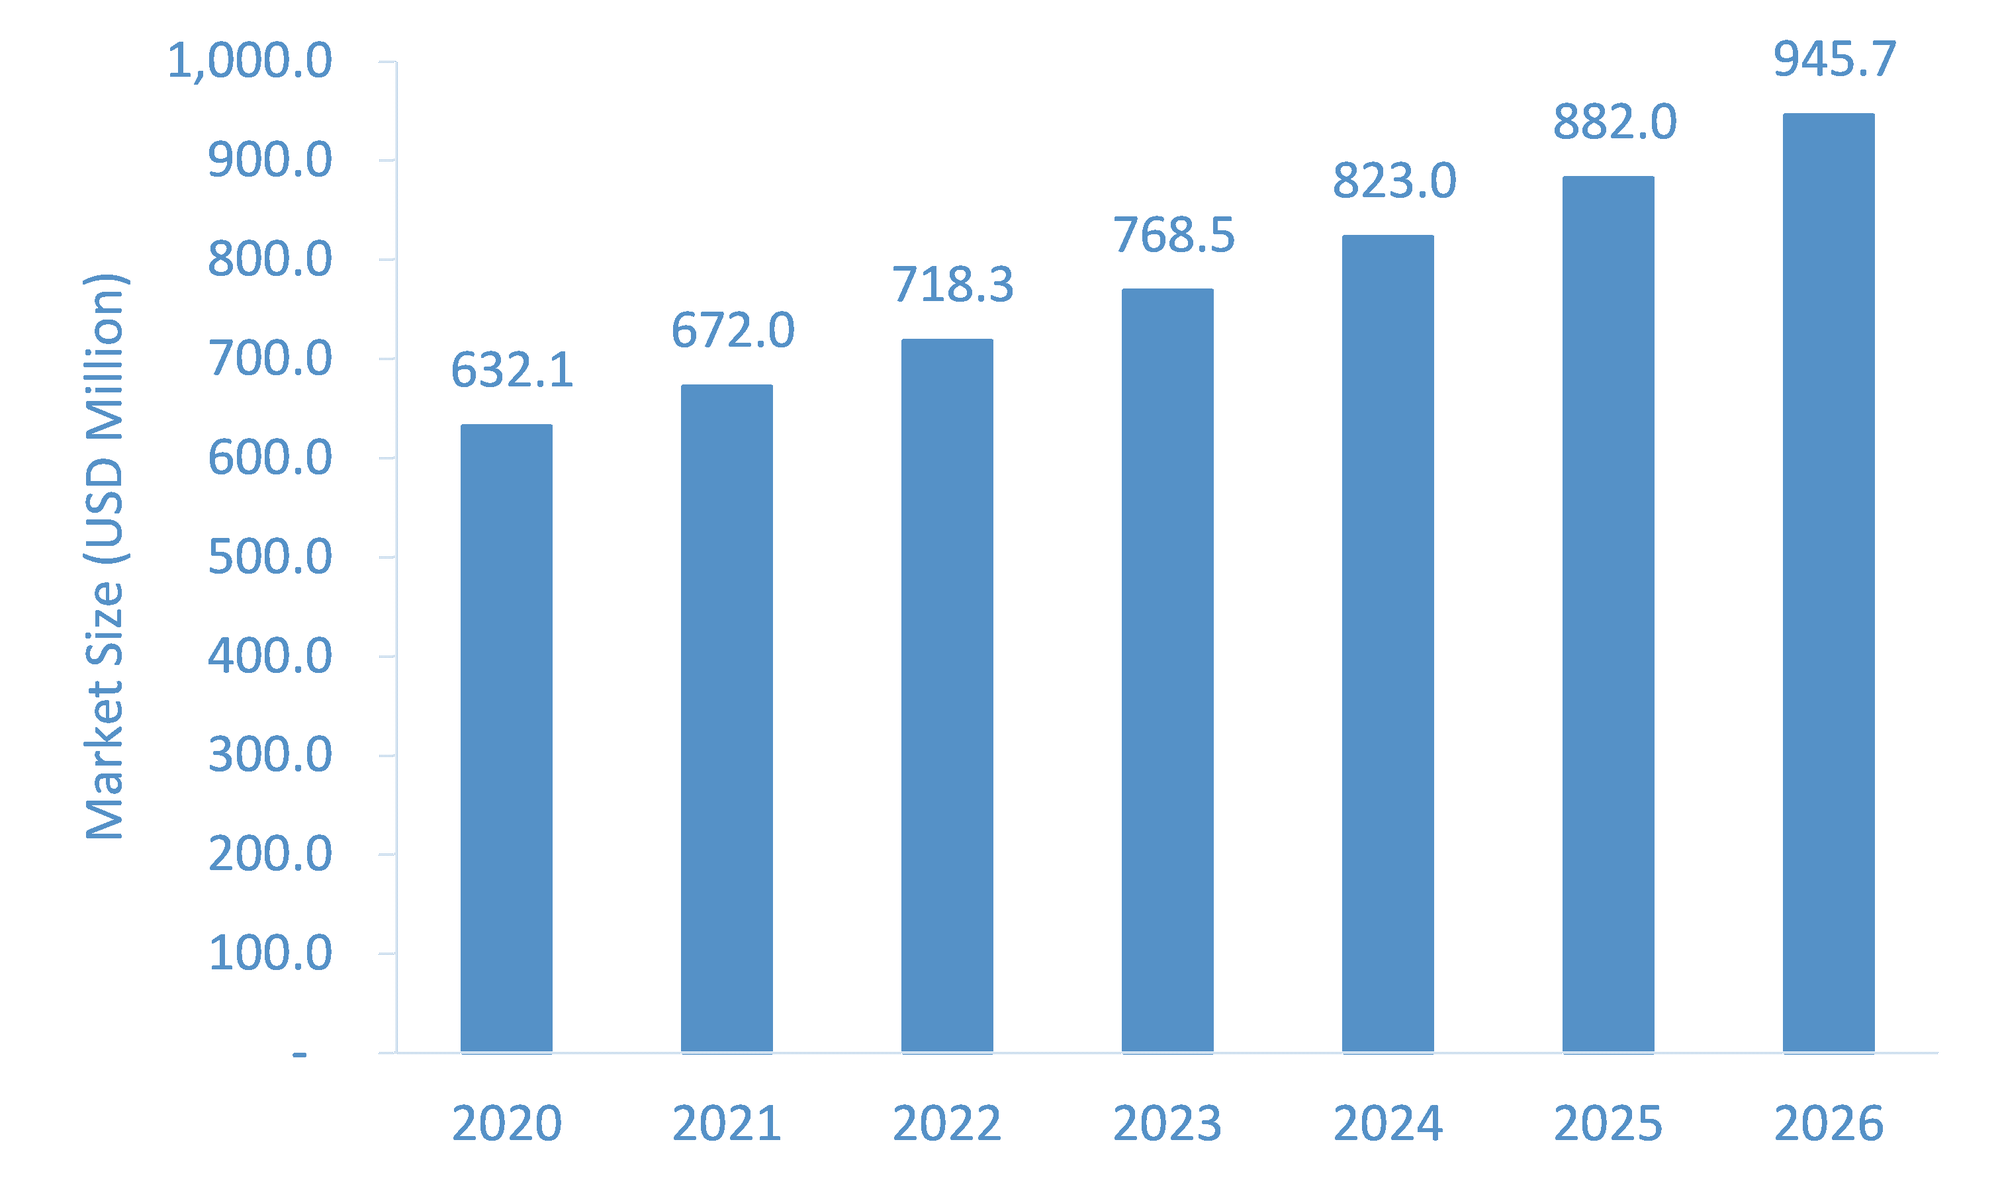 Radiation Protection Apparels Market Expected to Rise at A High CAGR